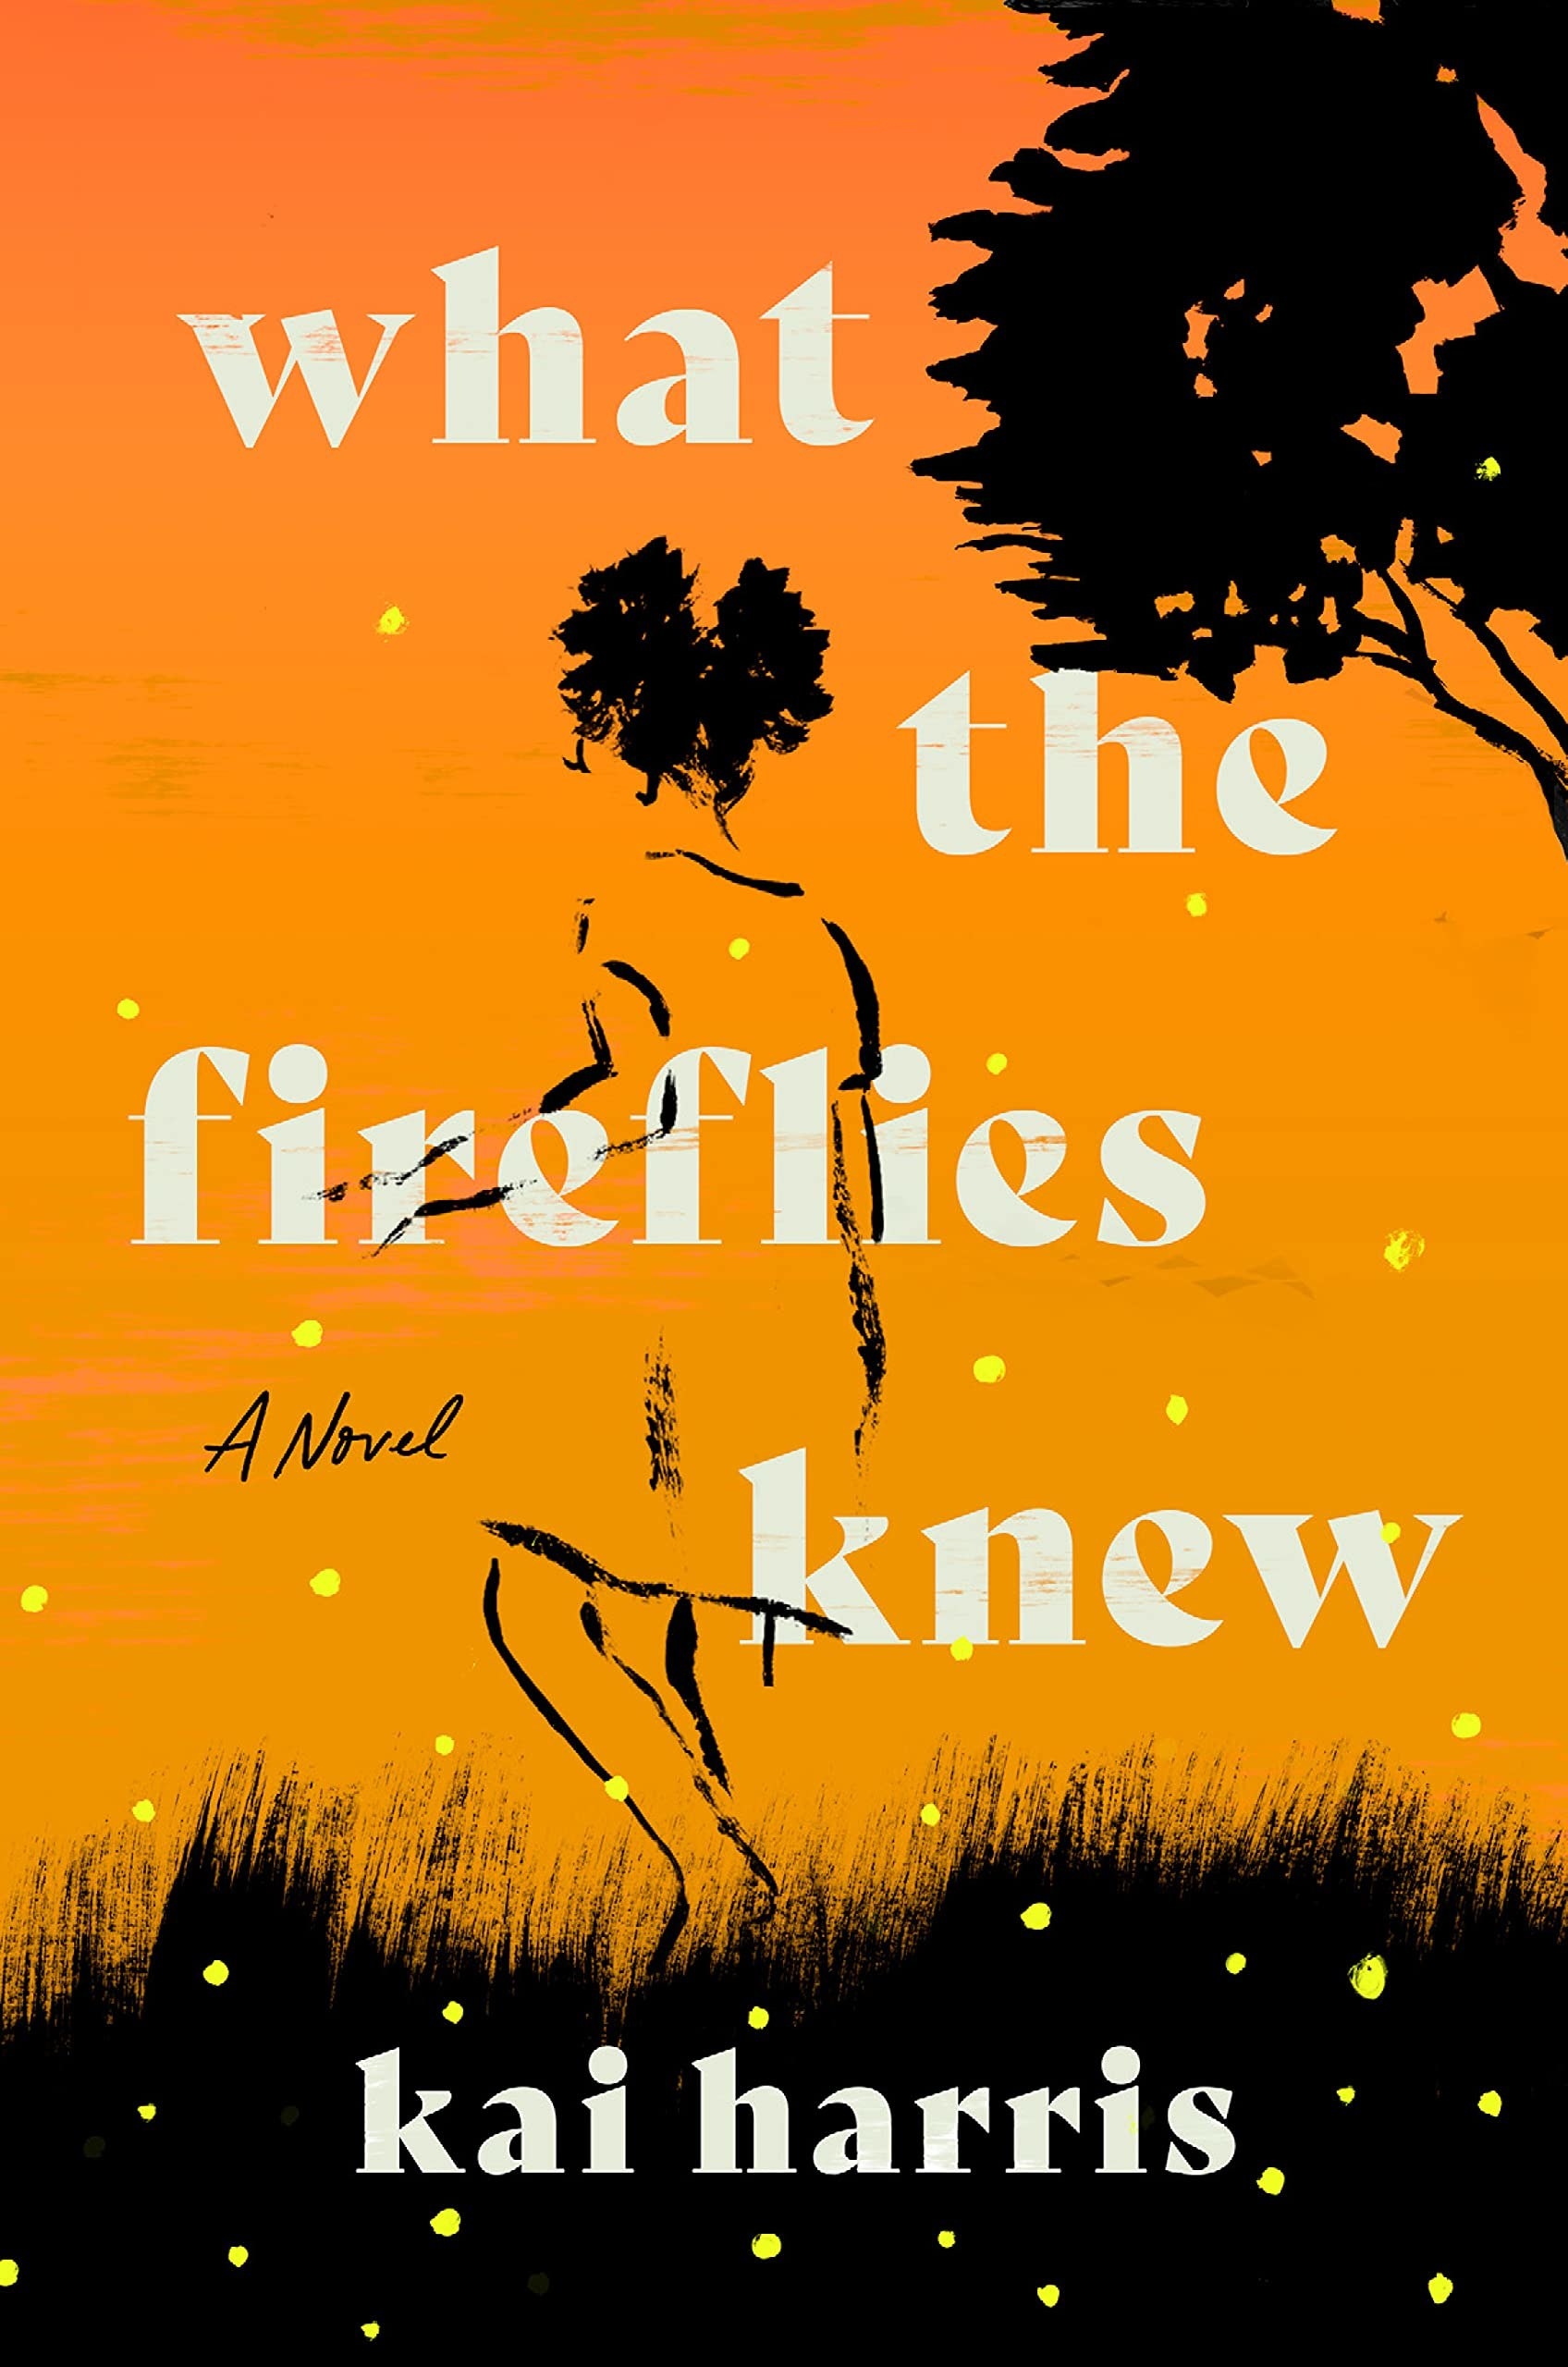 Sketch of a girl playing in a field with fireflies around with white text that reads What The Fireflies Knew&quot;